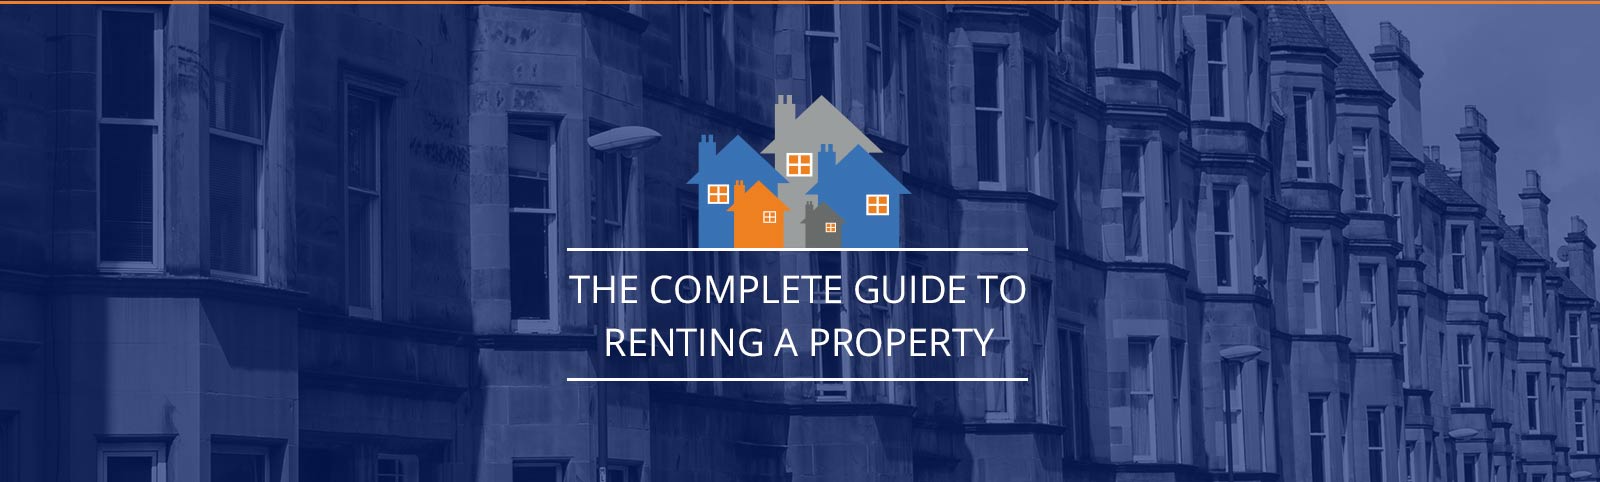 The complete guide to renting a property in Scotland